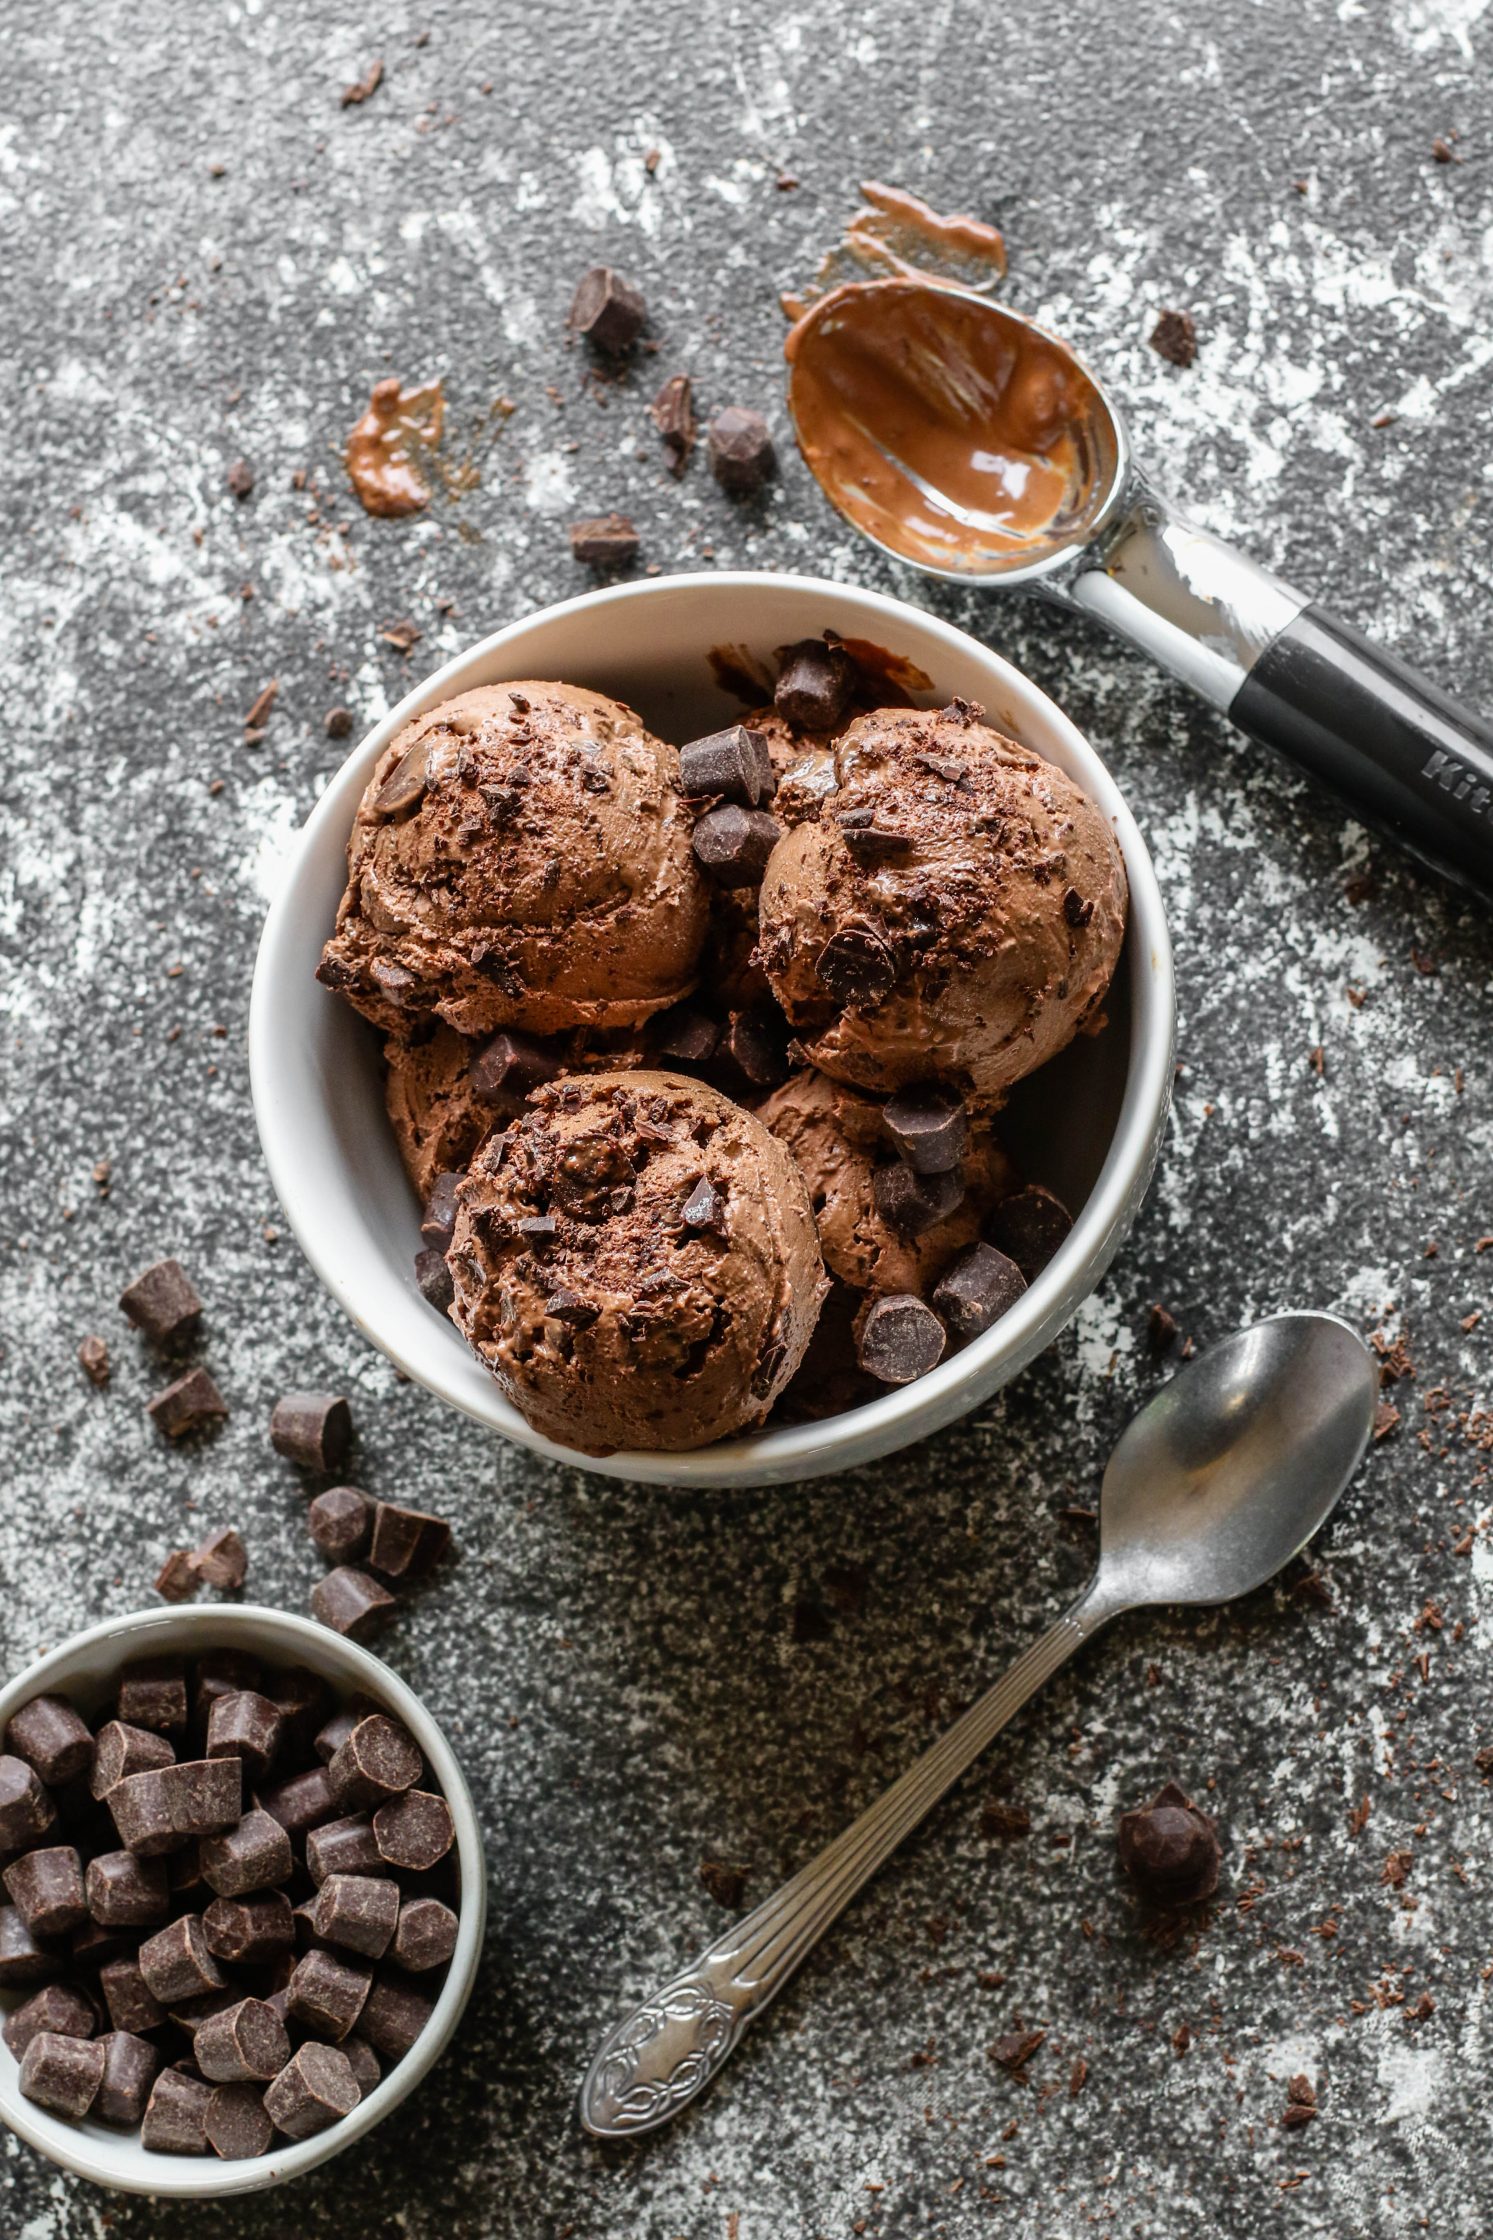 Mint Chocolate Chip Ice Cream (with essential oils), The Unrefined Kitchen